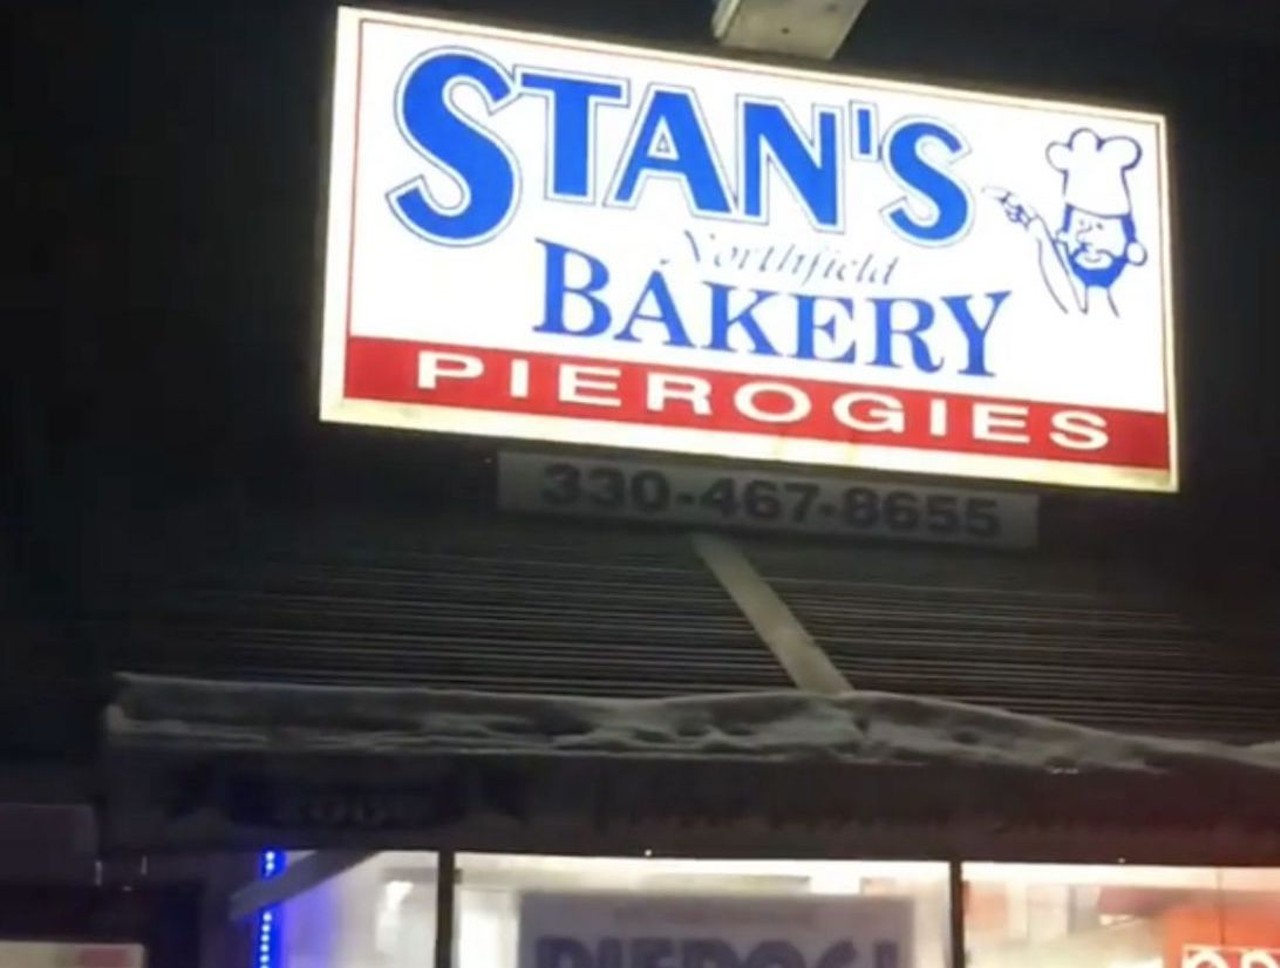  Stan&#146;s Northfield Bakery
9395 Olde 8 Rd., Northfield
Founded in 1961, this place is the definition of &#147;if it&#146;s not broke, don&#146;t fix it.&#148; In addition to the paczki, try their kolacky or their Lady Locks, a tender flakey horn filled with old-fashioned marshmallow meringue and sprinkled with powdered sugar. Try their strawberry cassata paczki. They&#146;re open on Paczki Day from 5 a.m. to 5 p.m. They have king cakes as well.
Photo via @StansNorthfieldBakery/Instagram